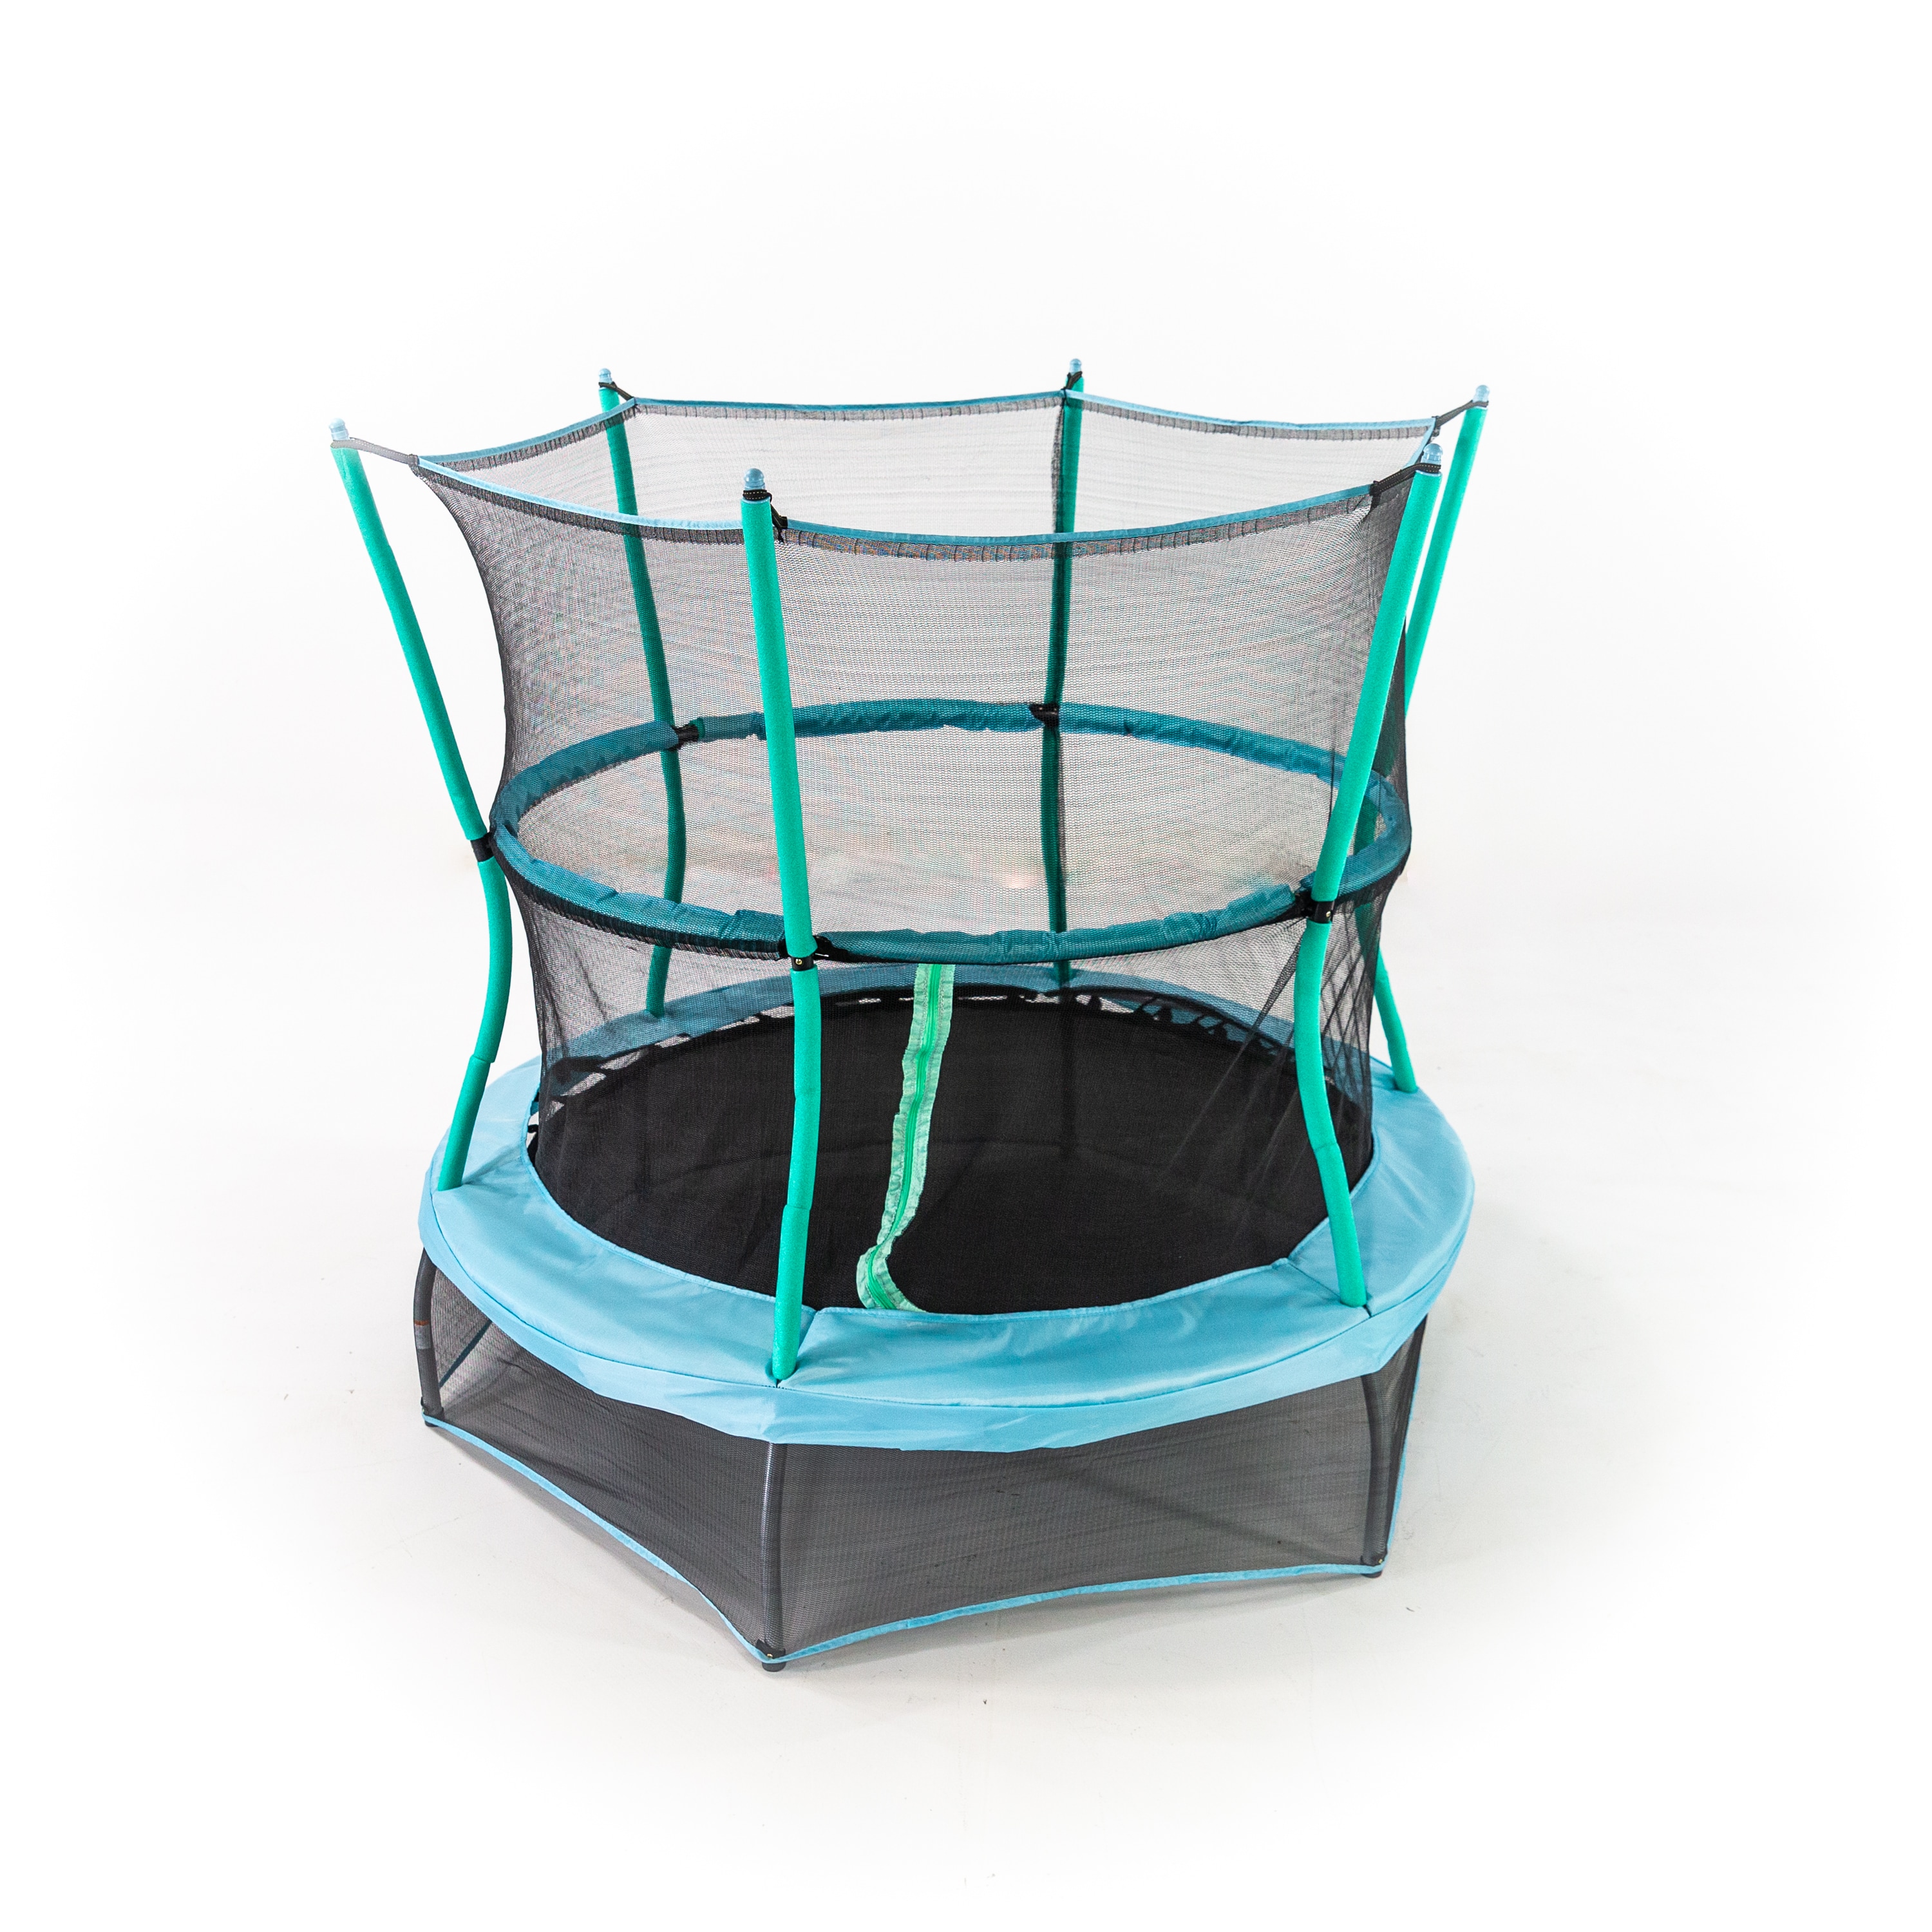 60-in Round Mini Trampoline with Enclosure - Indoor Kids Bouncer with Padded Handlebar - Blue Pad, Green Foam | - Skywalker SWB60UB00